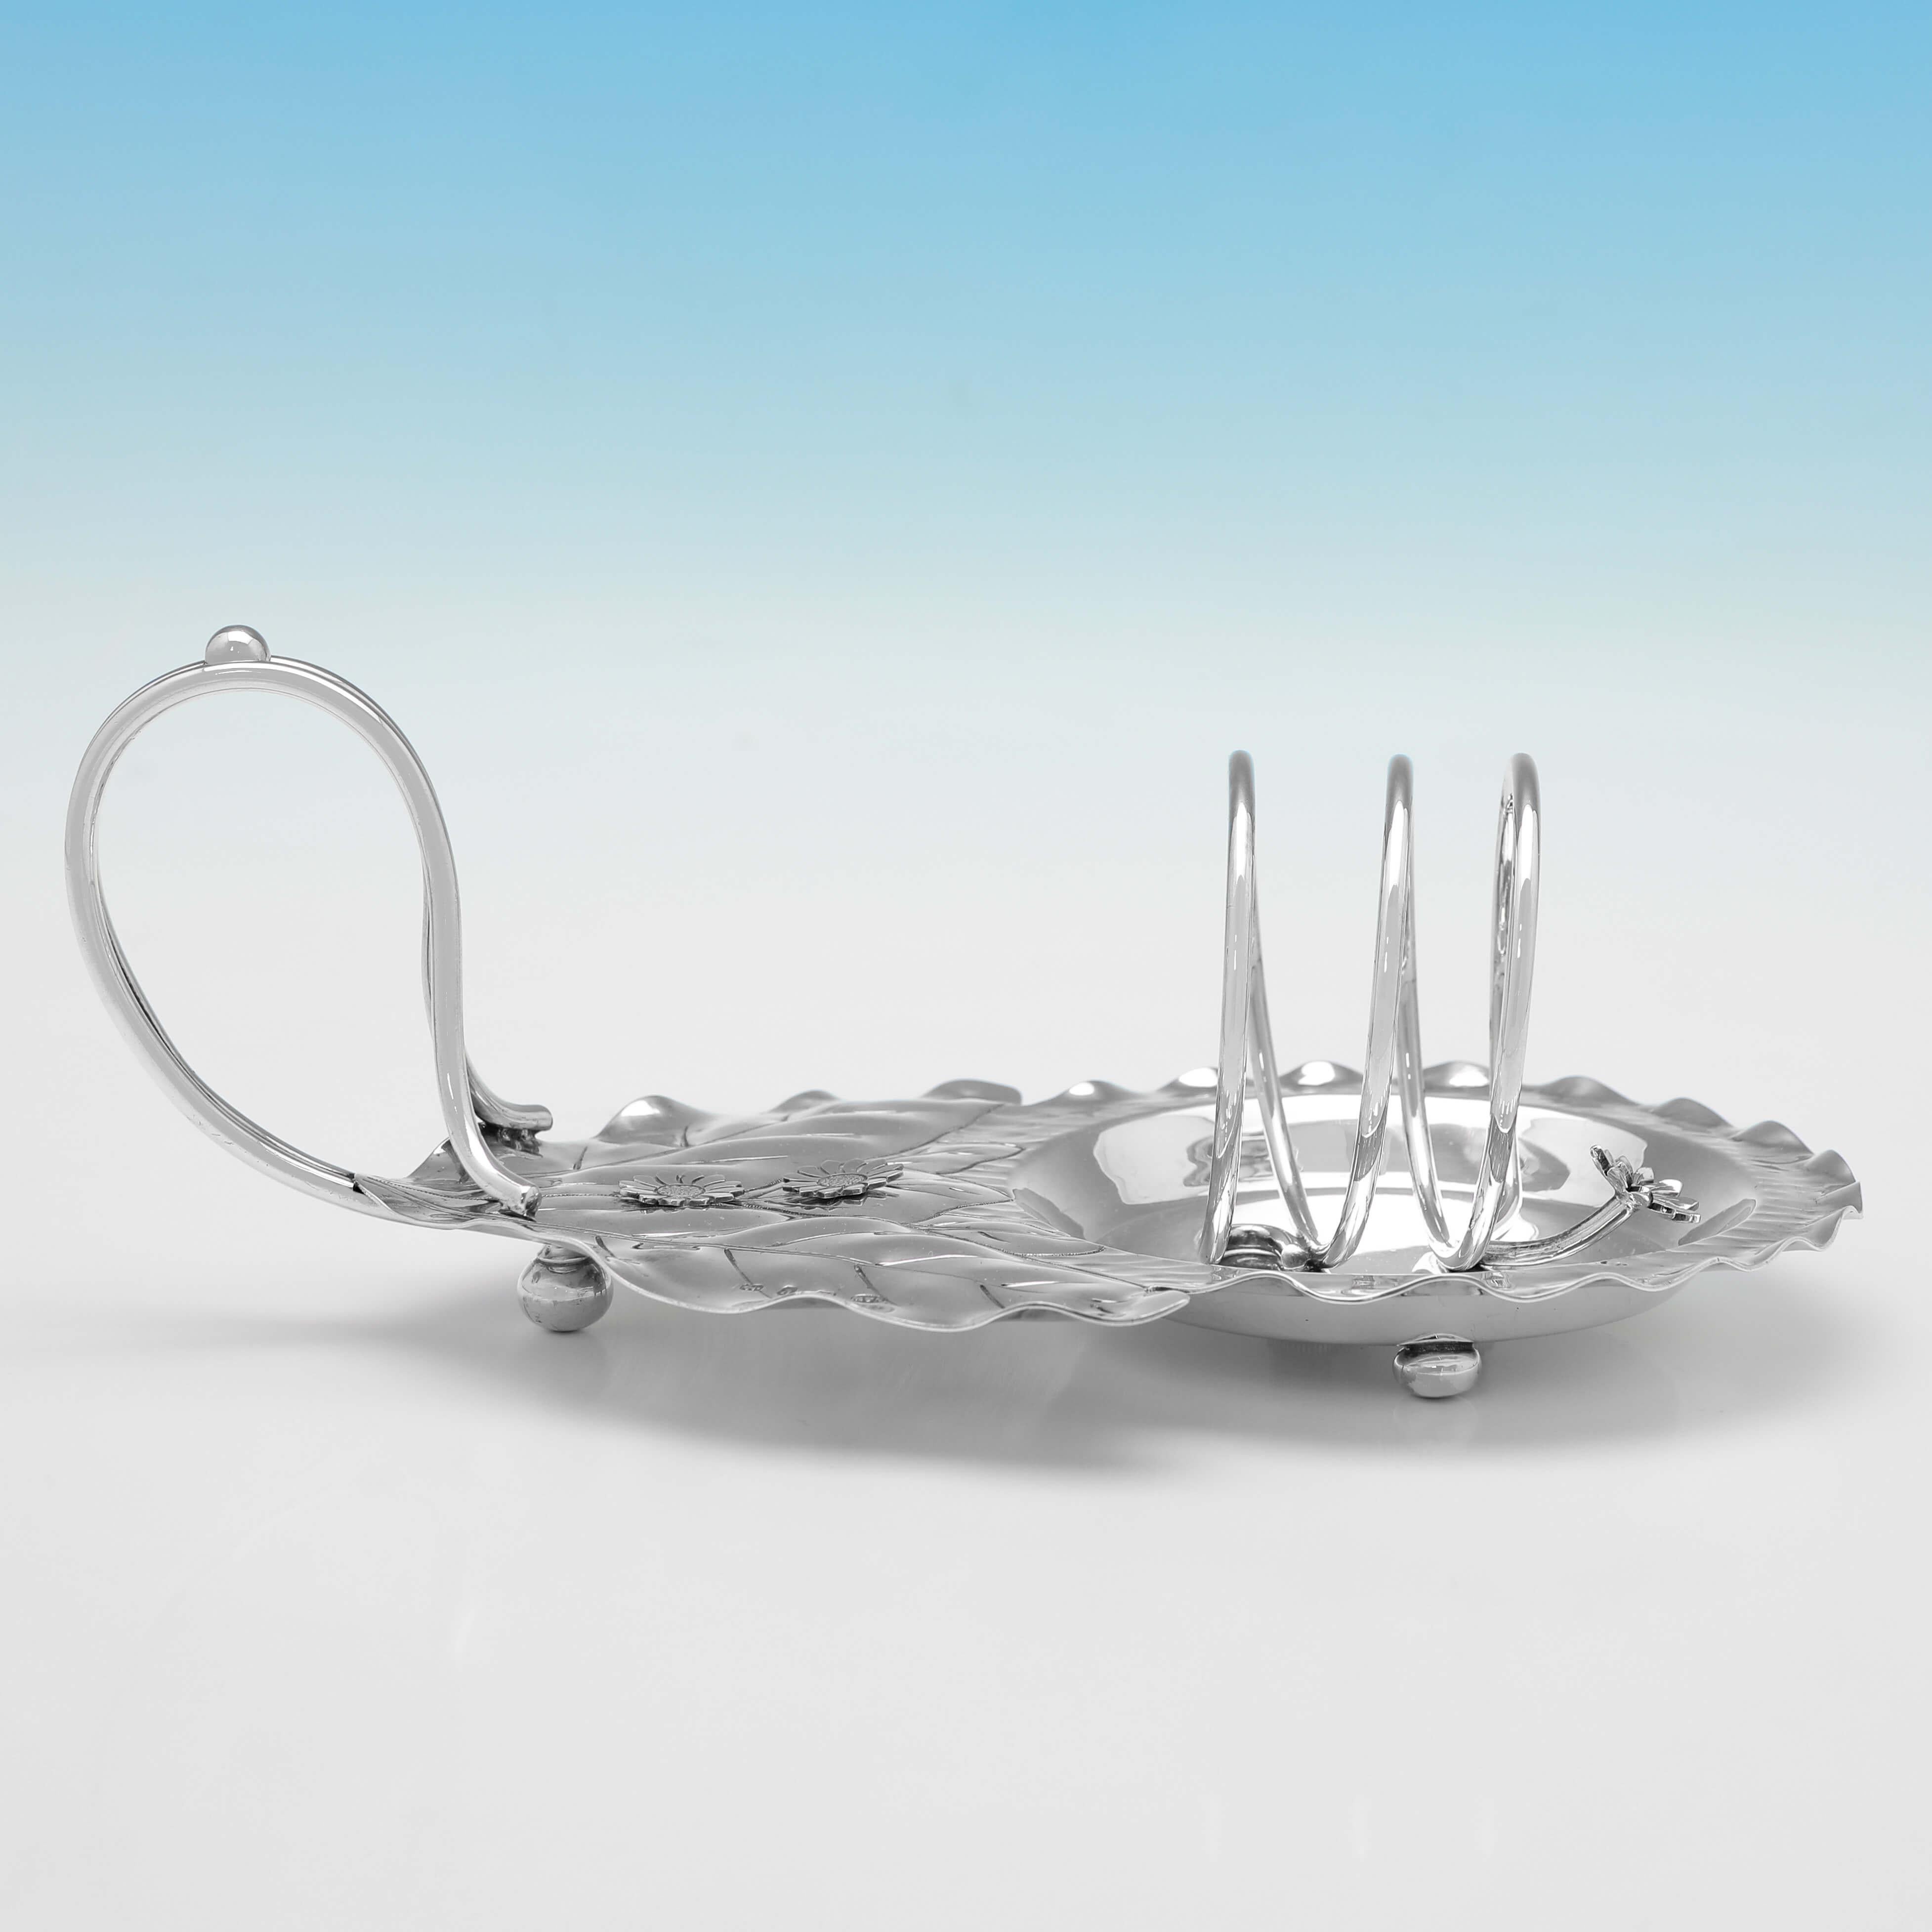 Hallmarked in Birmingham in 1898 by Norton & White, this charming, Victorian, Antique Sterling Silver Toast Rack, will hold 2 pieces of toast, and is designed to look like it is resting on a leaf. 

The toast rack measures 3.5